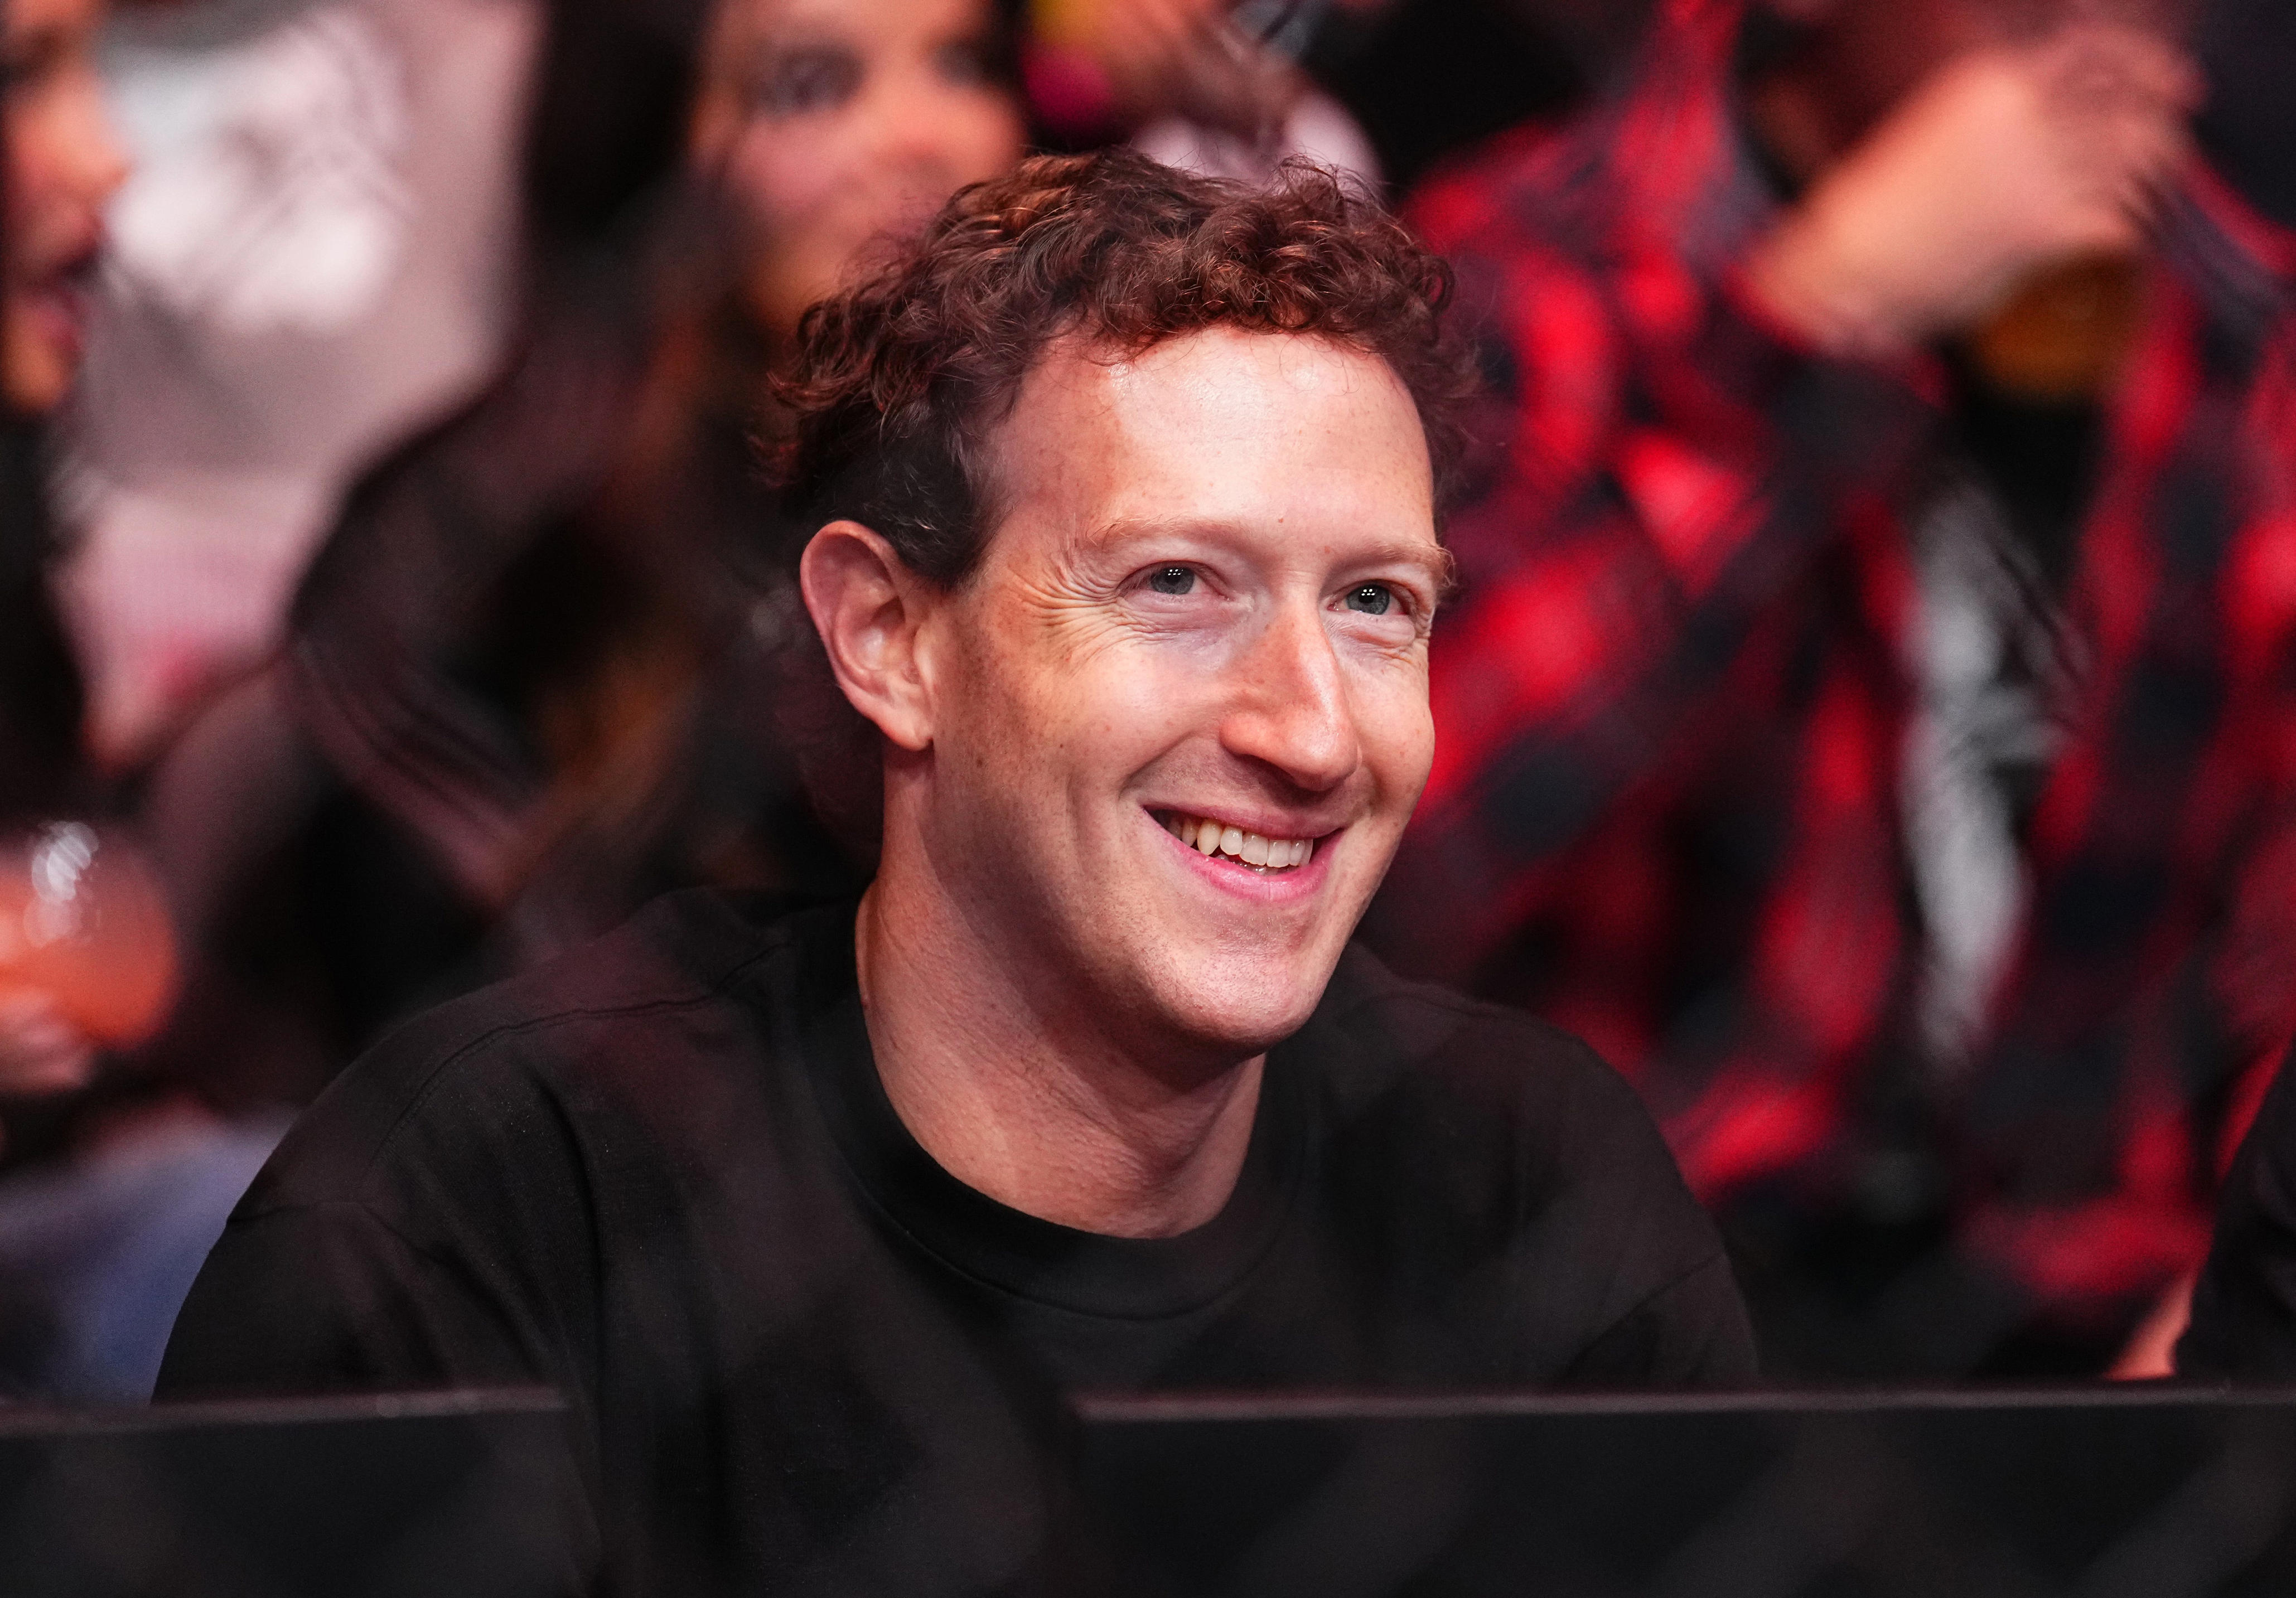 amazon, microsoft, mark zuckerberg is now california's richest billionaire after his fortune surged over the past year, report says